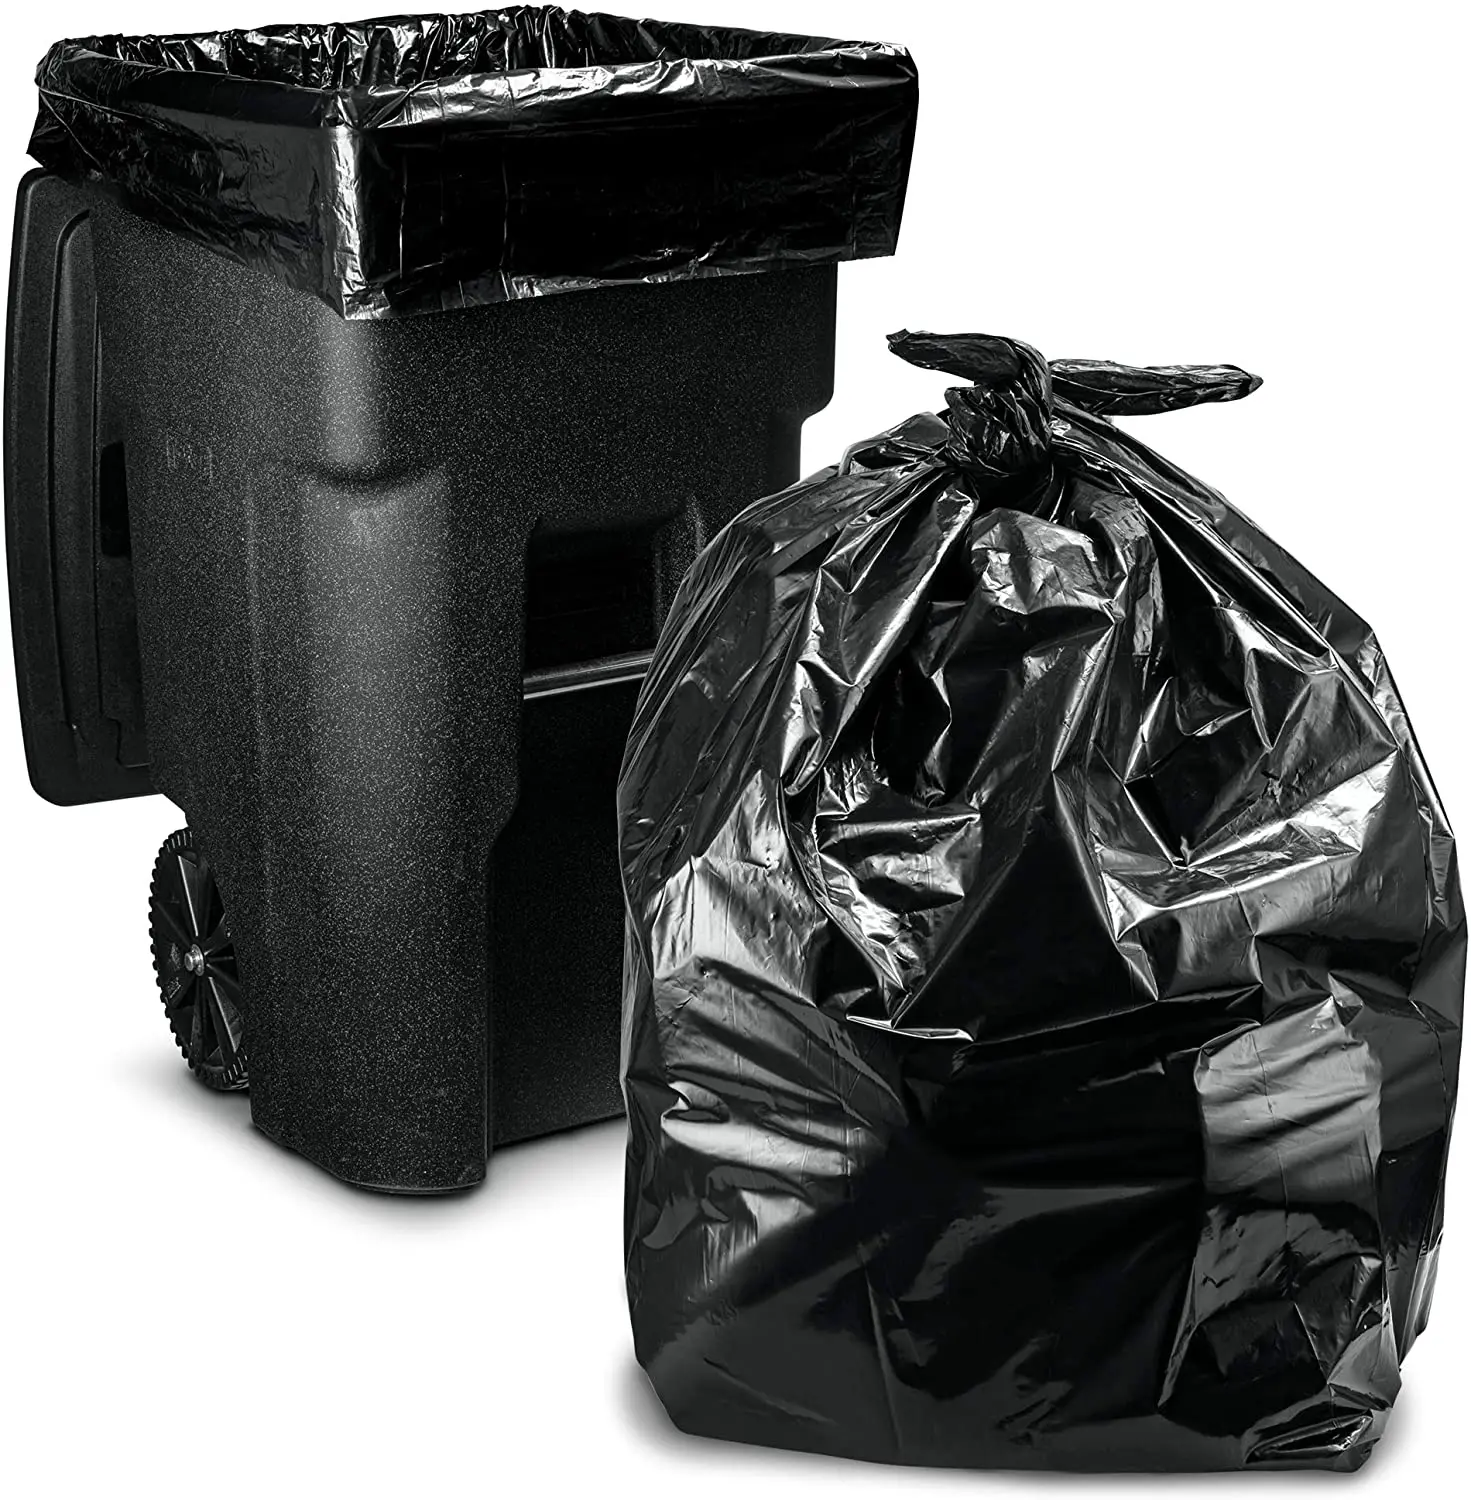 Why Are Most of Garbage Bags Black? – HANPAK – Customized plastic